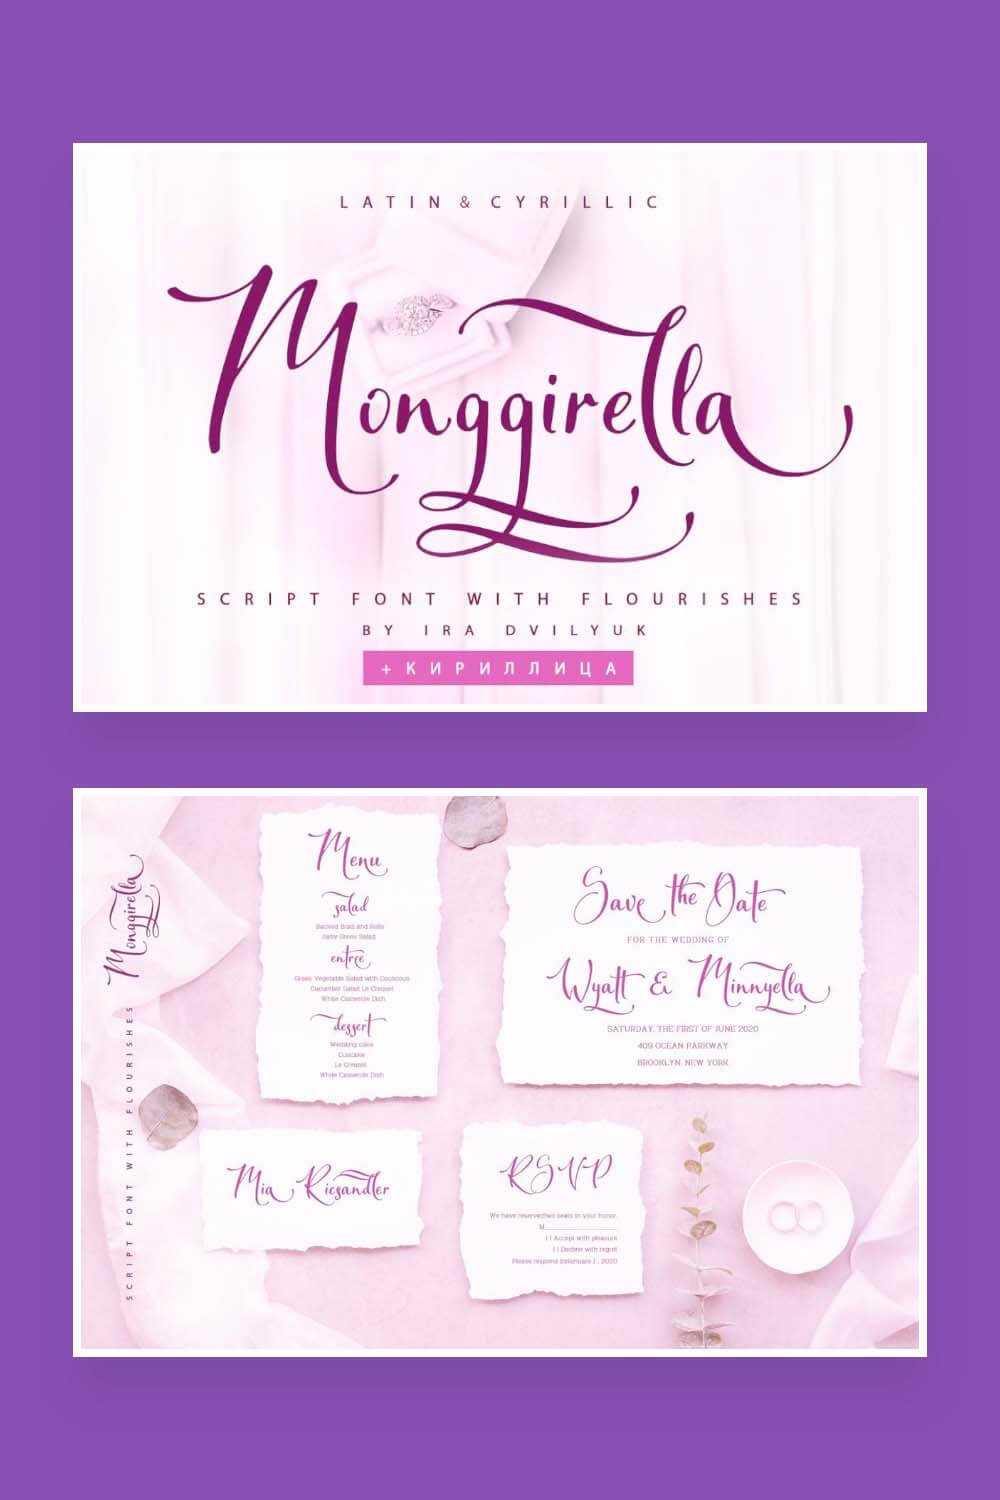 Two pictures for Pinterest: Latin & Cyrillic Monggirella Script Font with Flourishes.